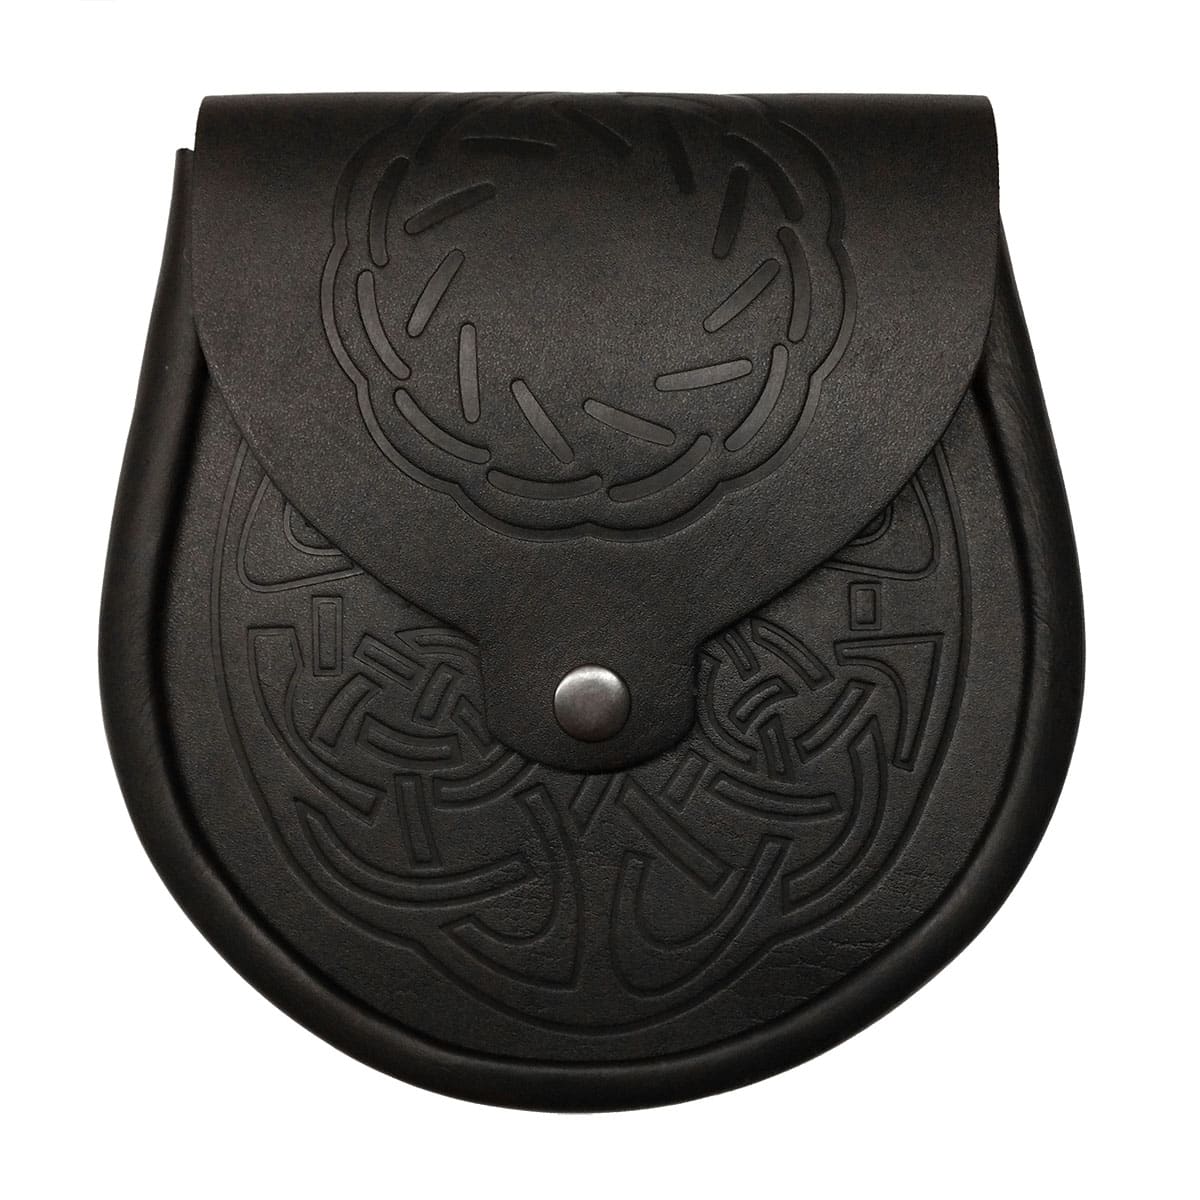 A black belt with a Celtic design on it, featuring the Celtic Circle Sporran.